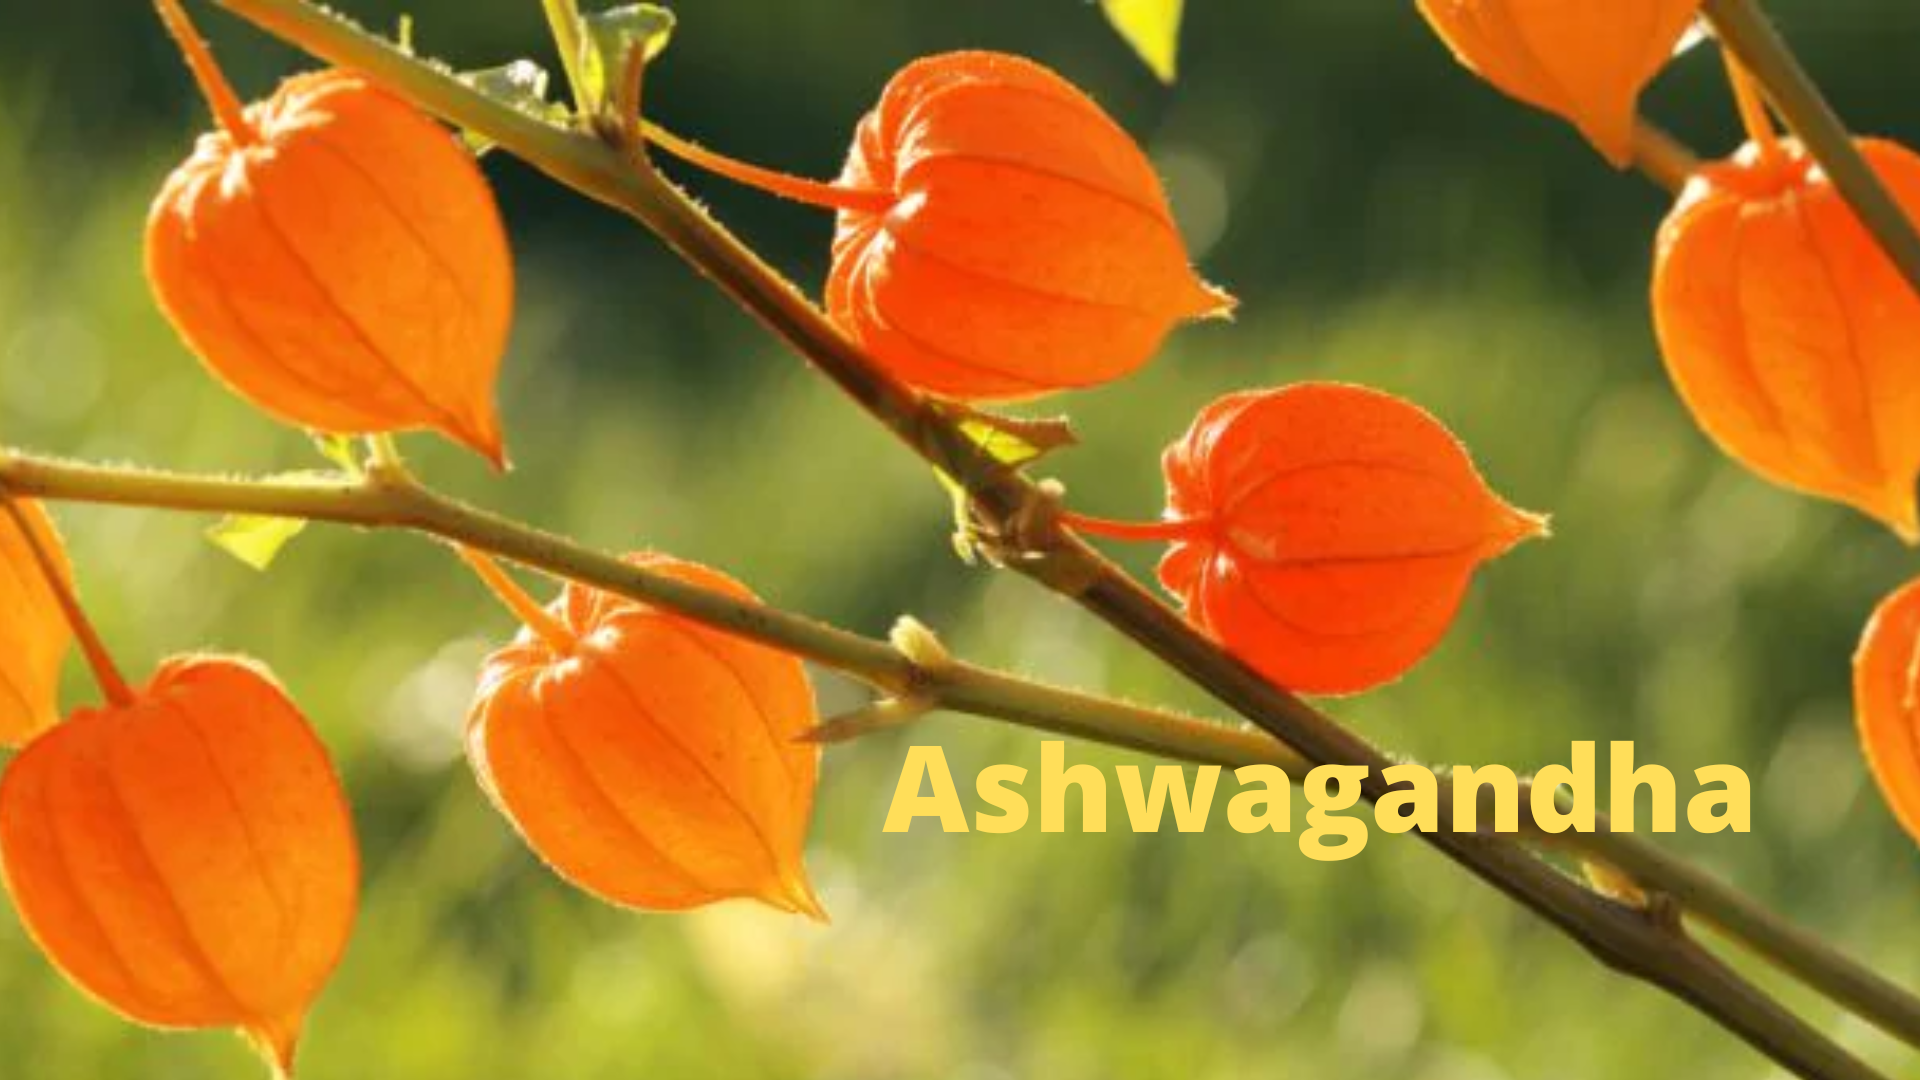 11 Best Ashwagandha Brands in India: Usage And Benefits